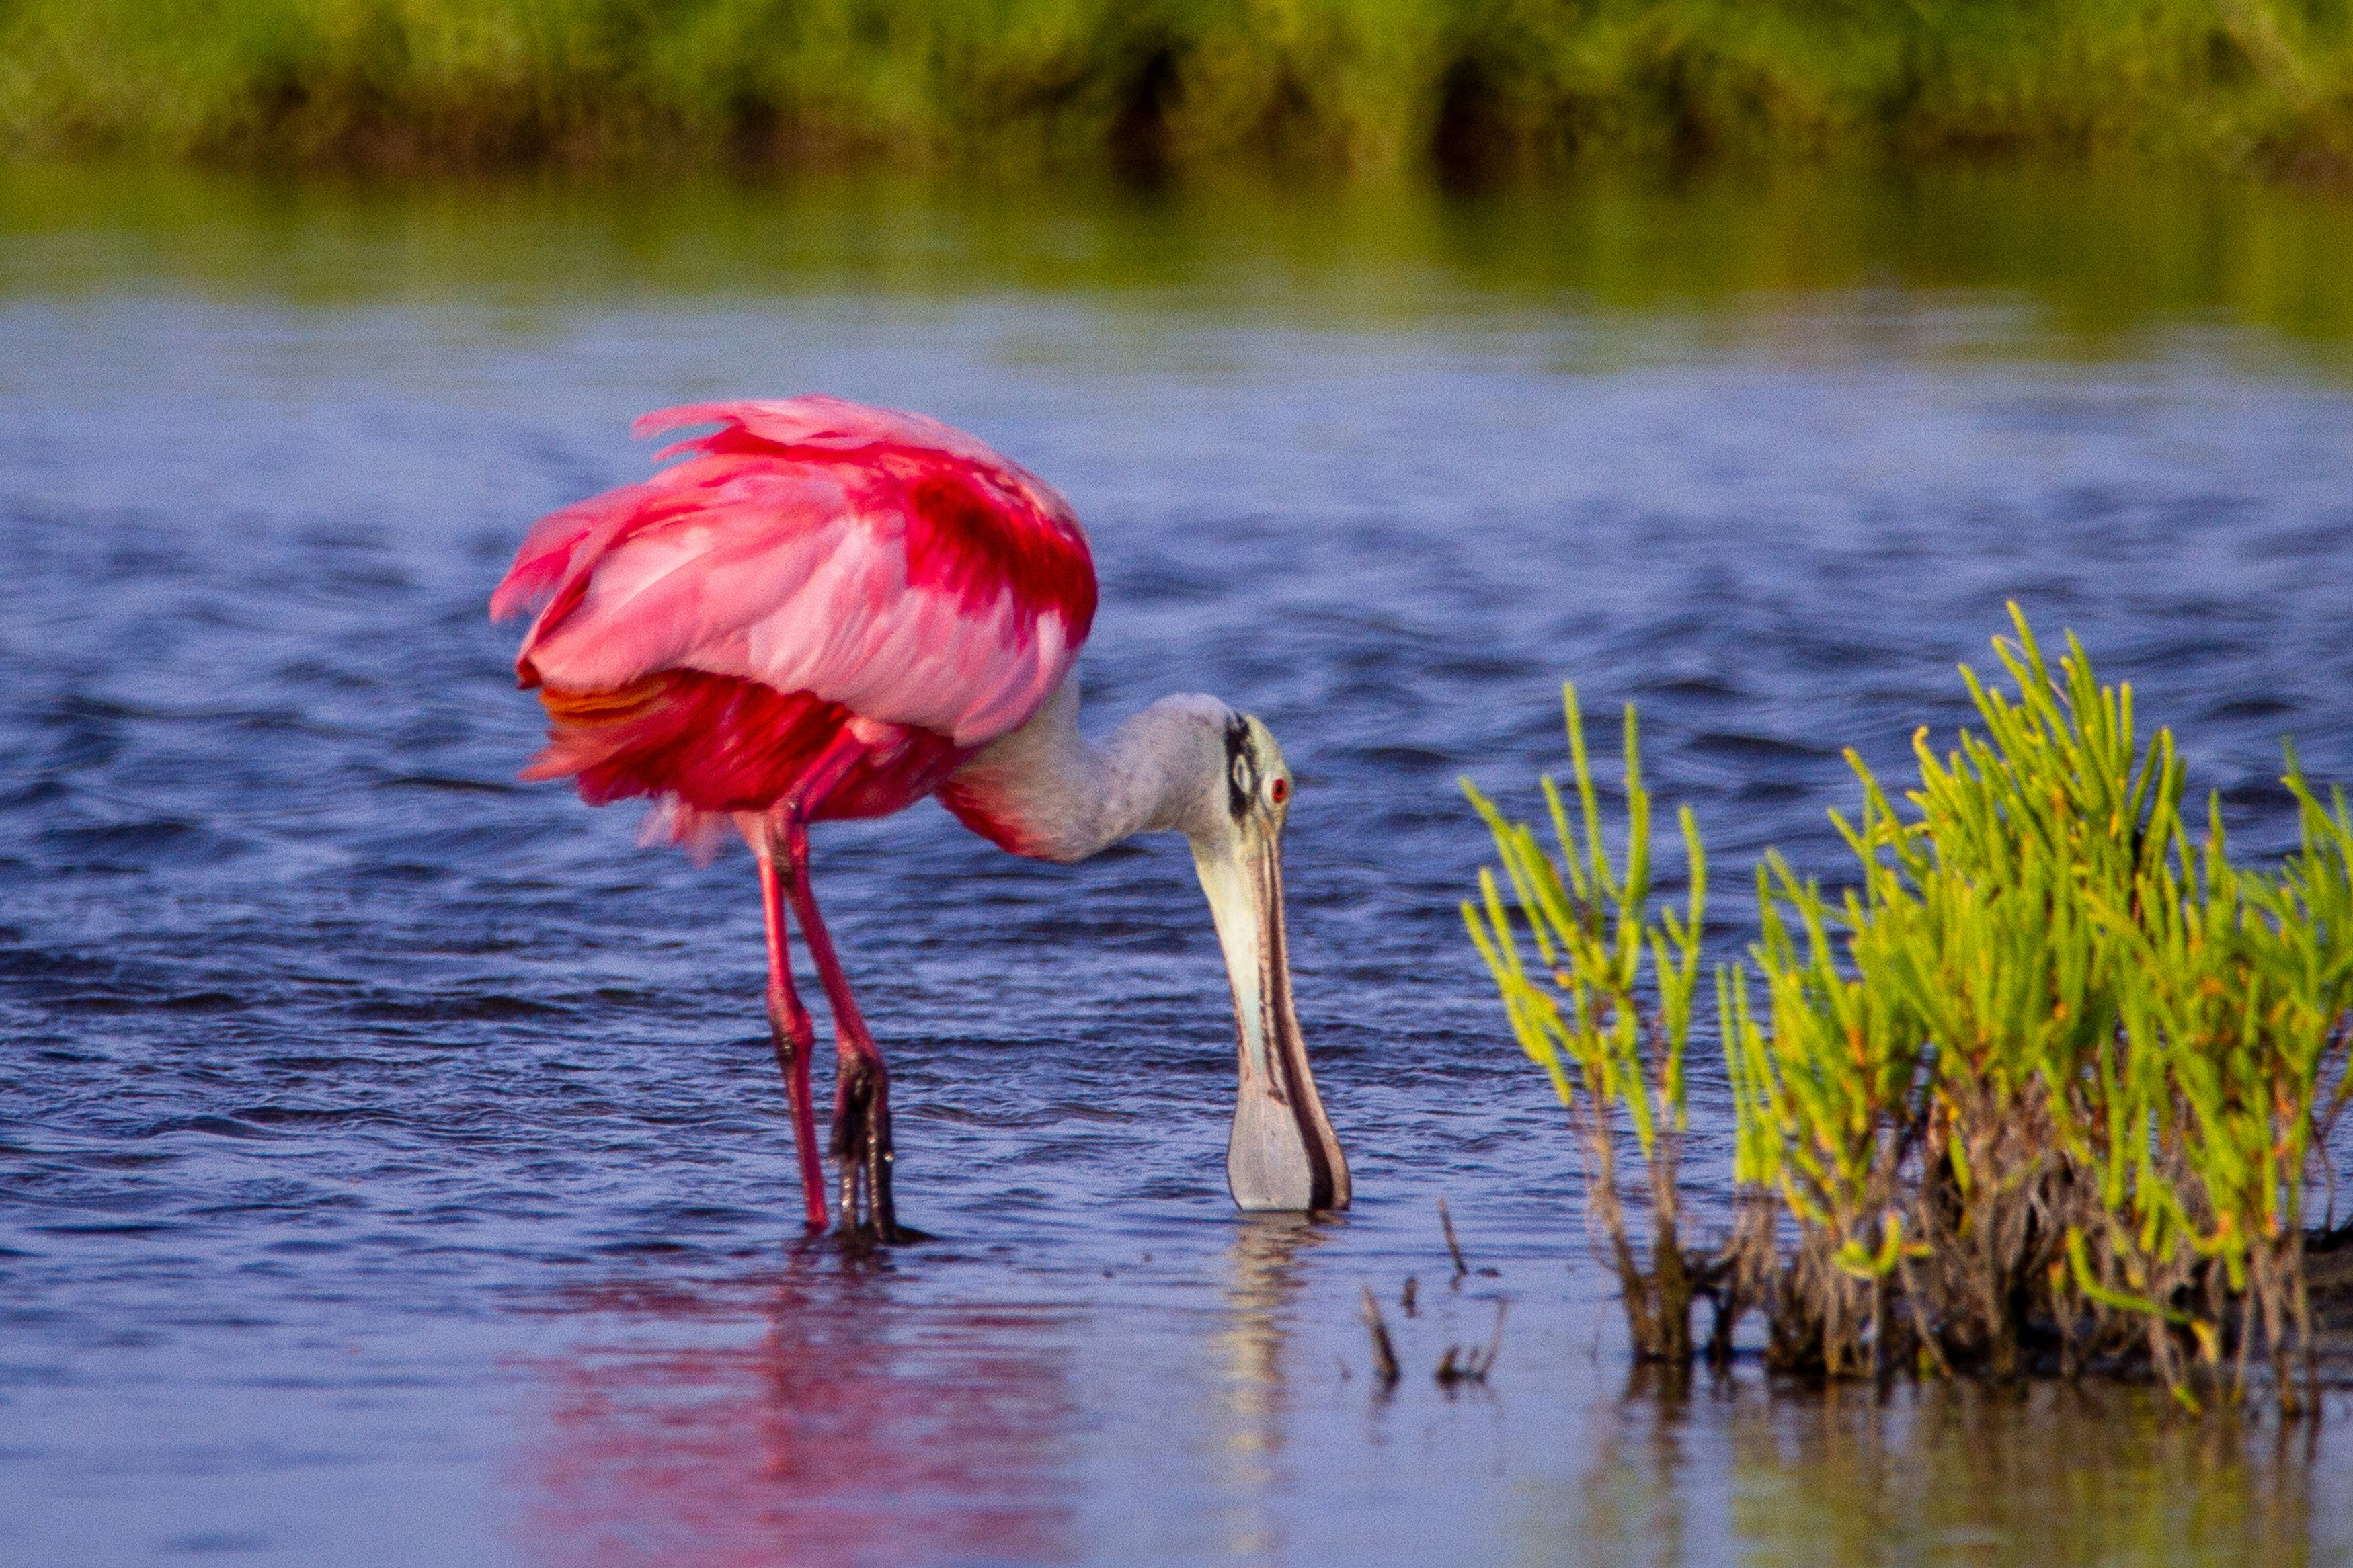 A roseate spoonbill fishes for food in Corpus Christi, TX.